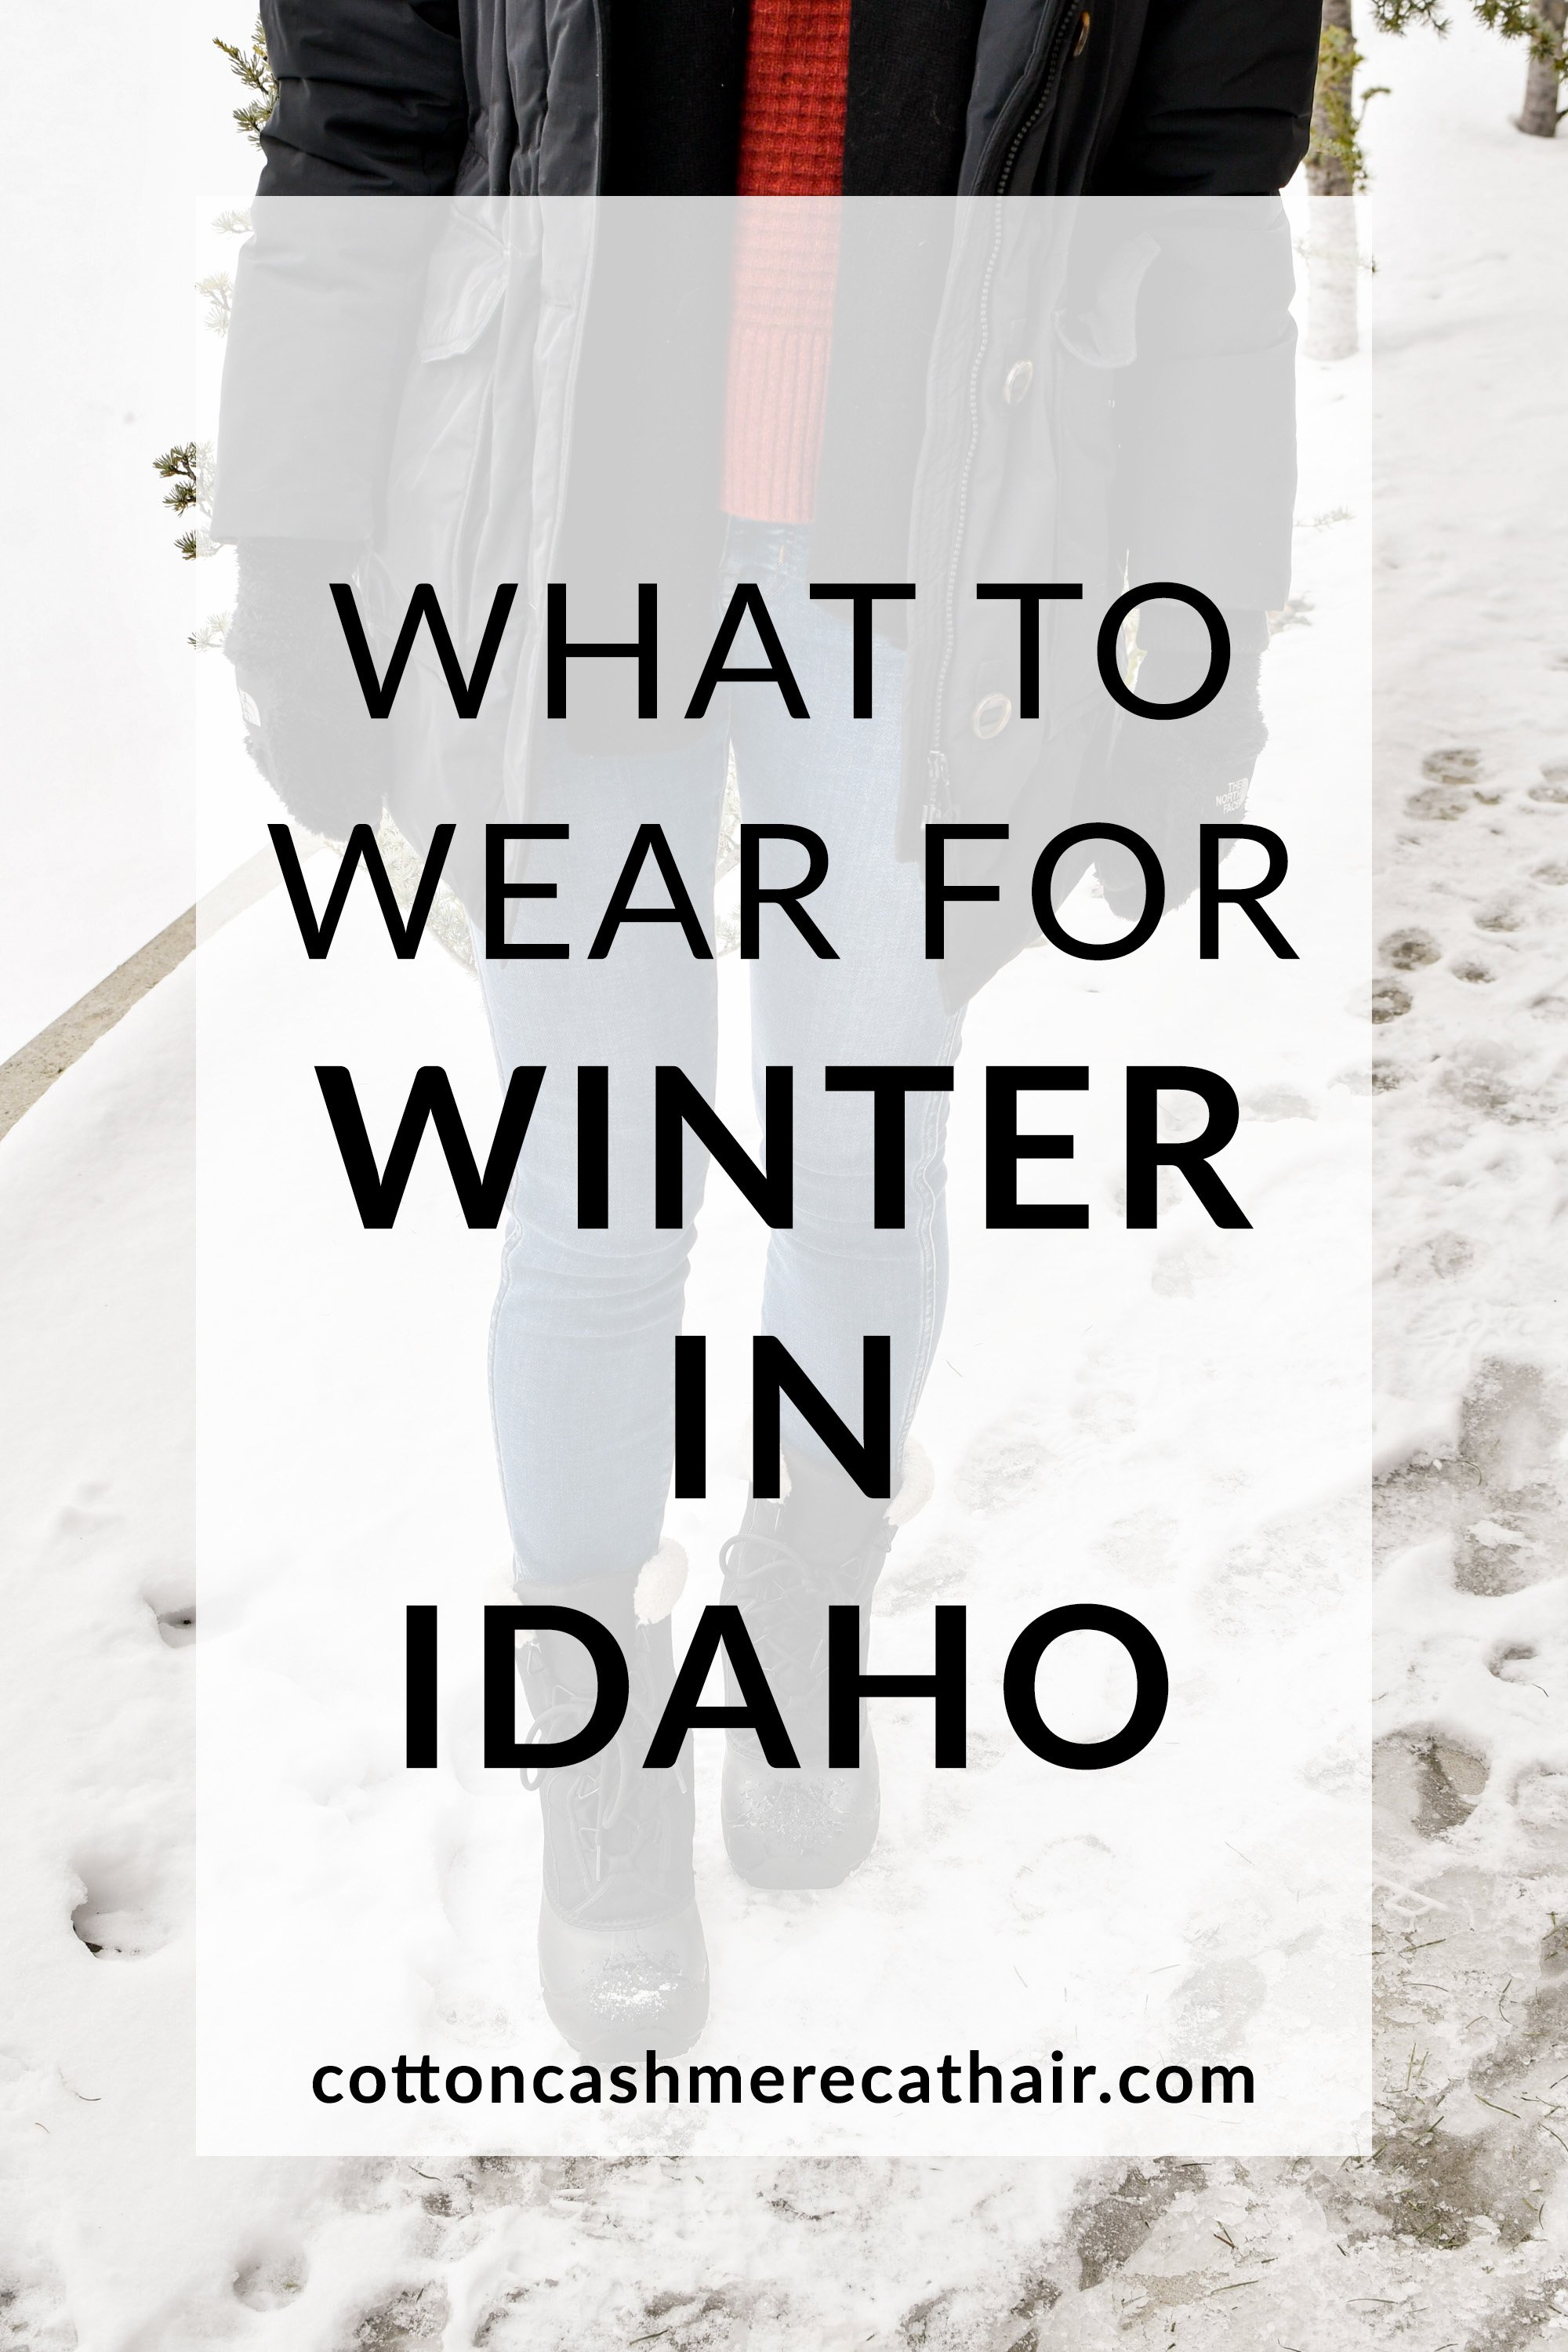 What to wear for winter in Idaho